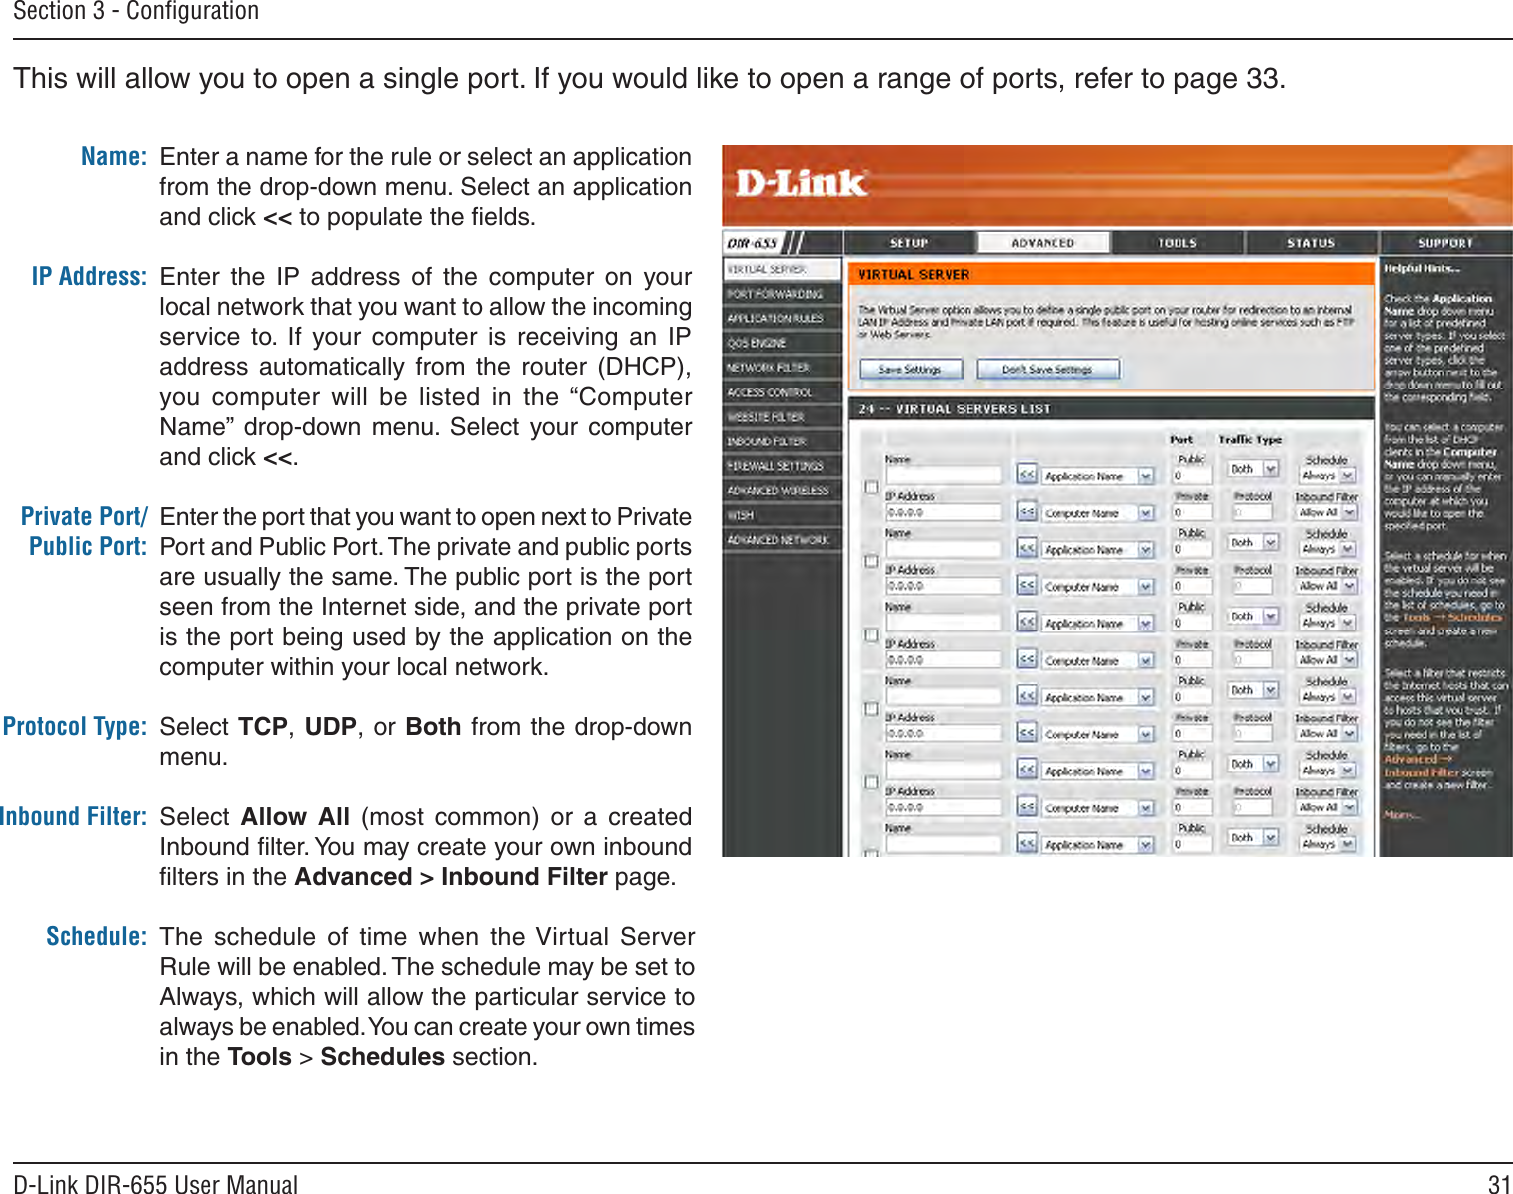 31D-Link DIR-655 User ManualSection 3 - ConﬁgurationThis will allow you to open a single port. If you would like to open a range of ports, refer to page 33.Enter a name for the rule or select an application from the drop-down menu. Select an application and click &lt;&lt; to populate the ﬁelds.Enter  the  IP  address  of  the  computer  on  your local network that you want to allow the incoming service  to.  If  your  computer  is  receiving  an  IP address  automatically  from  the  router  (DHCP), you computer  will  be  listed  in  the “Computer Name”  drop-down  menu.  Select  your computer and click &lt;&lt;. Enter the port that you want to open next to Private Port and Public Port. The private and public ports are usually the same. The public port is the port seen from the Internet side, and the private port is the port being used by the application on the computer within your local network.Select TCP, UDP, or Both from the drop-down menu.Select  Allow  All  (most  common)  or  a  created Inbound ﬁlter. You may create your own inbound ﬁlters in the Advanced &gt; Inbound Filter page.The  schedule  of  time  when  the Virtual  Server Rule will be enabled. The schedule may be set to Always, which will allow the particular service to always be enabled. You can create your own times in the Tools &gt; Schedules section.Name:IP Address:Private Port/Public Port:Protocol Type:Inbound Filter:Schedule: